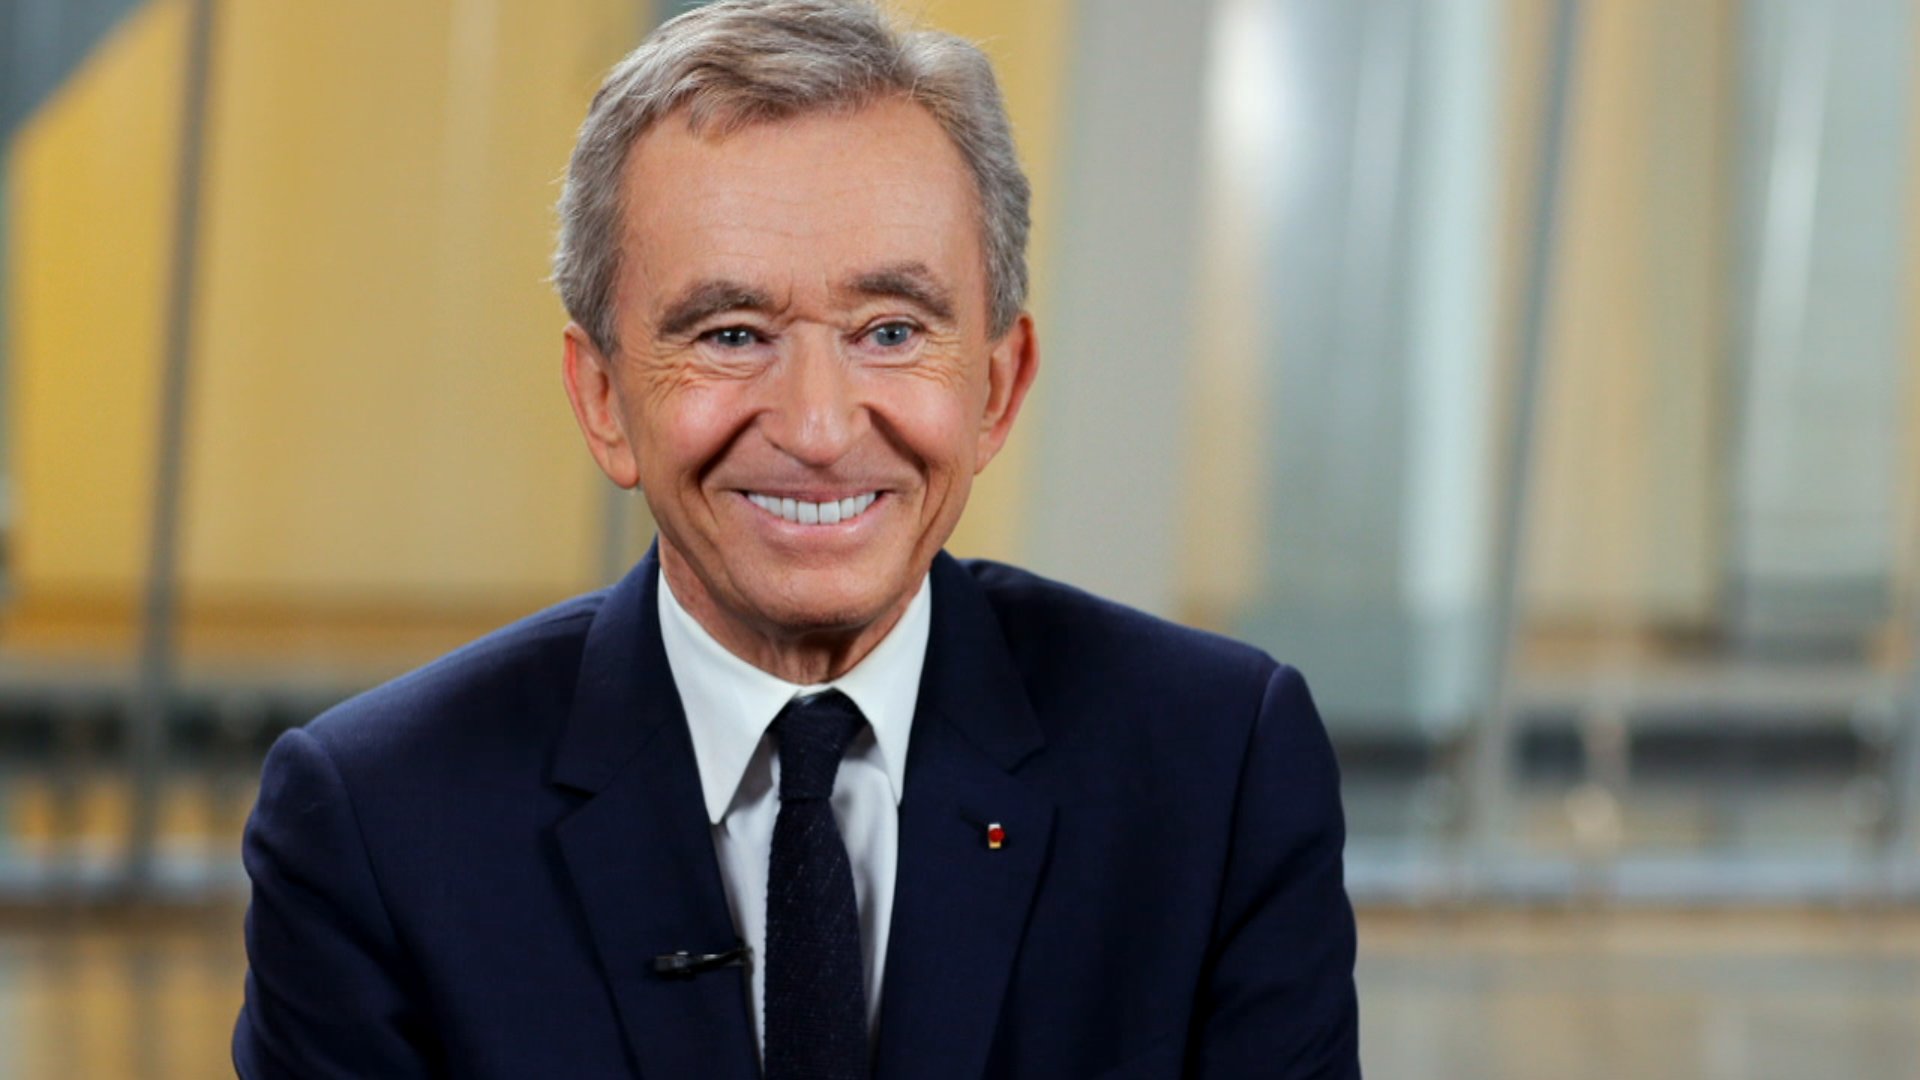 CNBC Int'l PR on X: Bernard Arnault took his father's construction  business & turned it into the world's largest luxury product company,  @LVMH. Tune in to #TheBraveOnes tonight at 10pm BST /